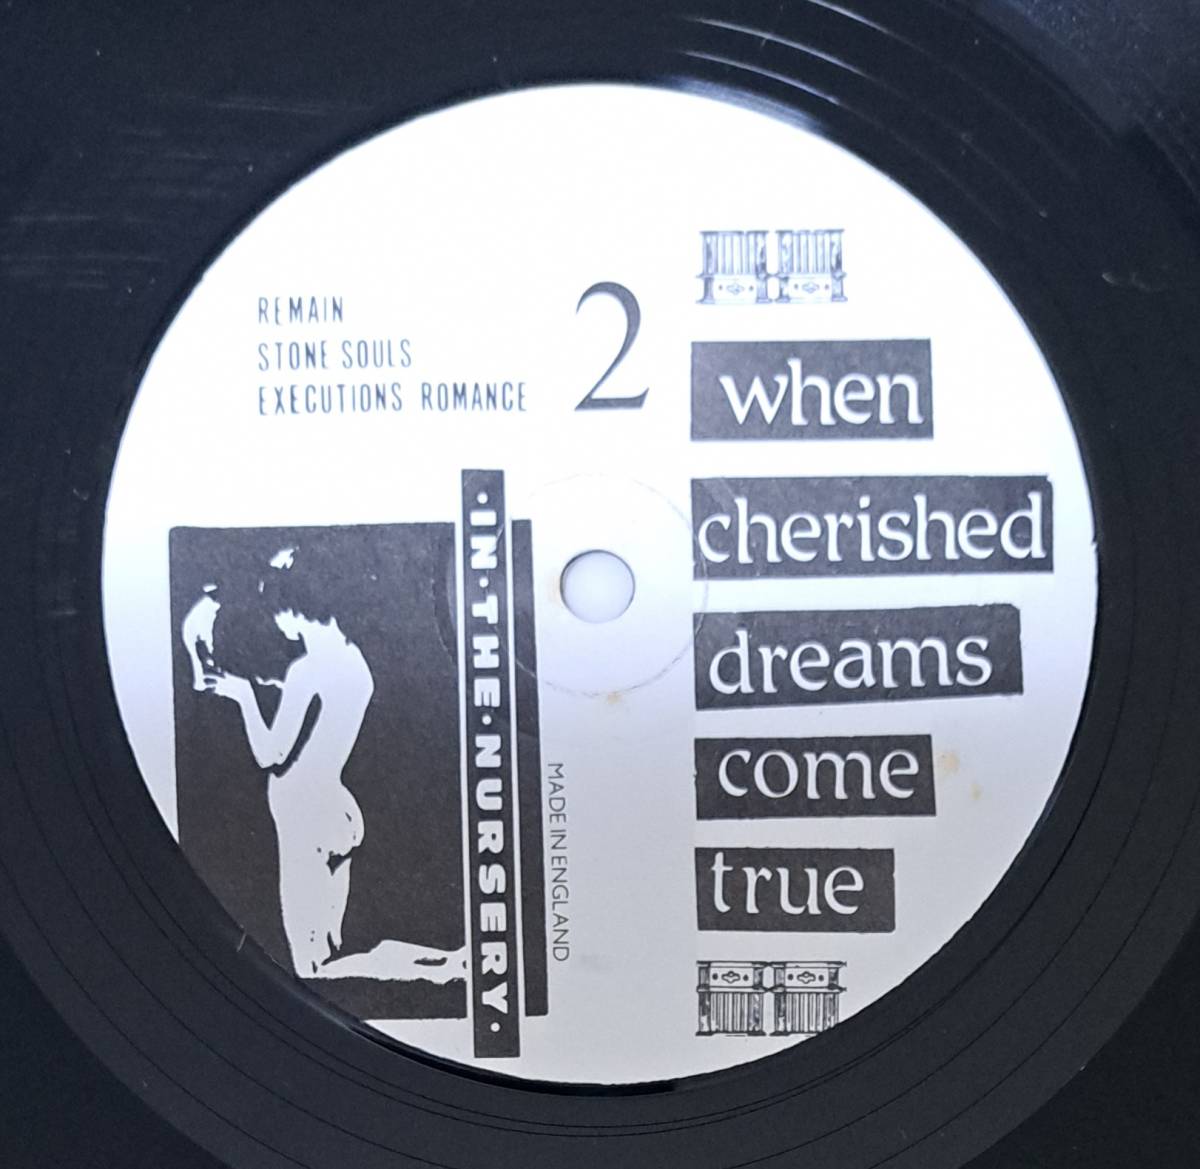 UK盤12inch◎In The Nursery『When Cherished Dreams Come Ture』VIRTUE 2 Paragon イン・ザ・ナーサリー インディロック ダークウェイヴ_画像6